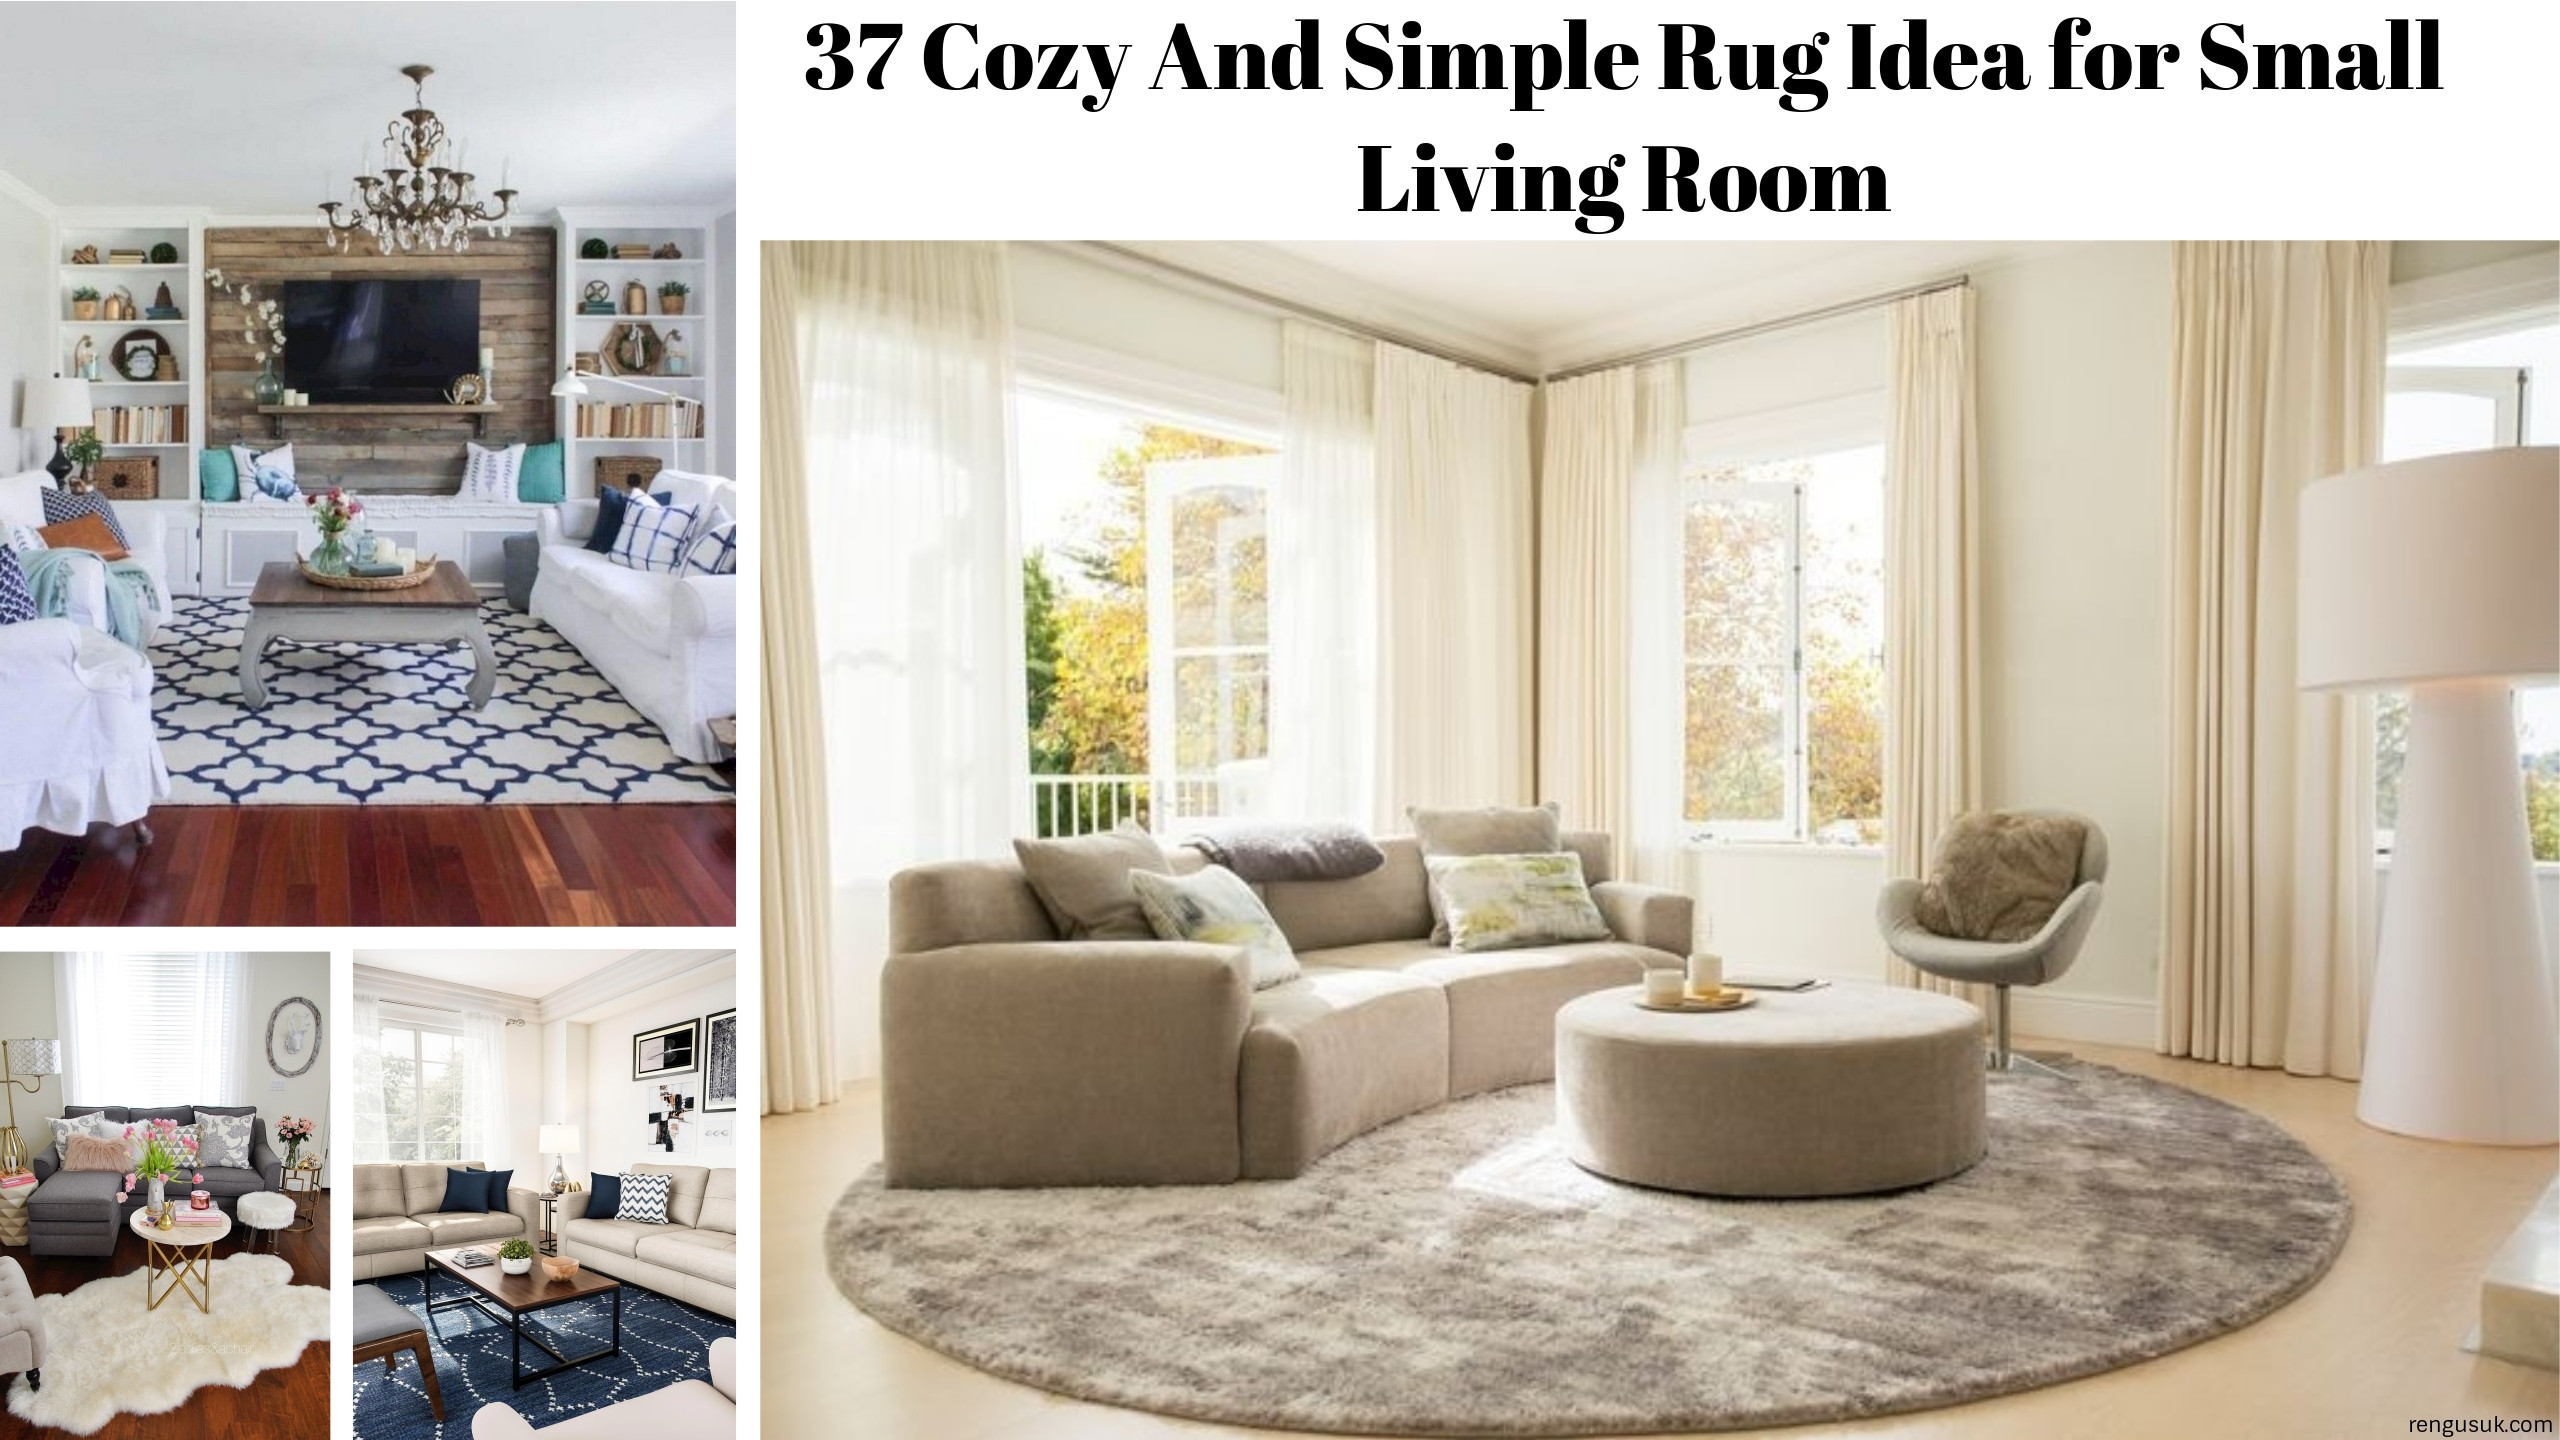 Small Living Room Rugs
 37 Cozy And Simple Rug Idea for Small Living Room